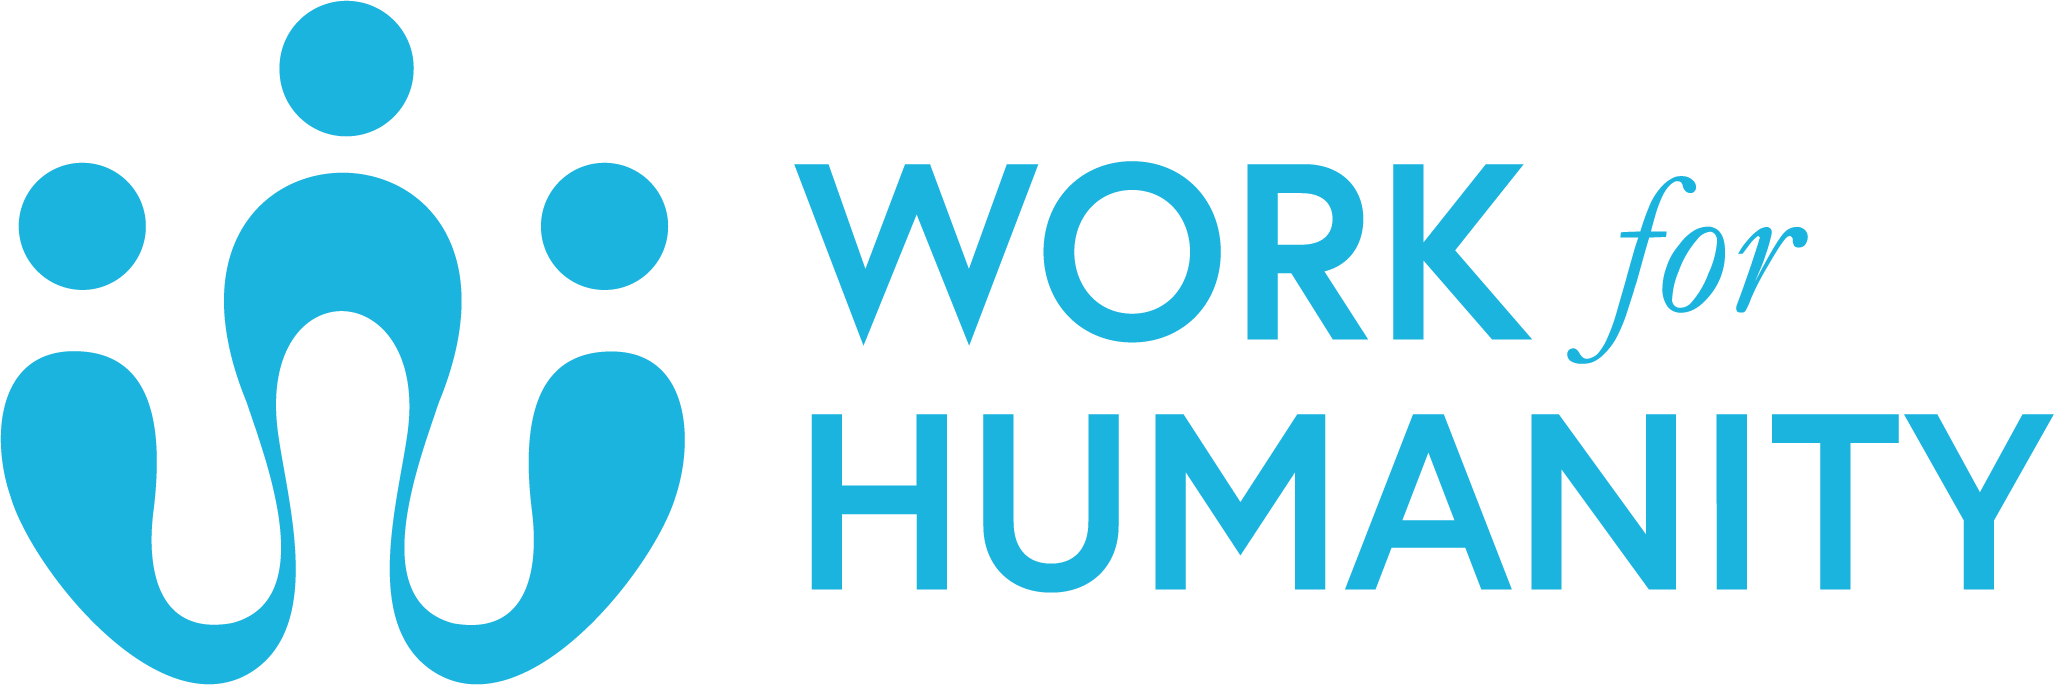 Humanity PNG Images